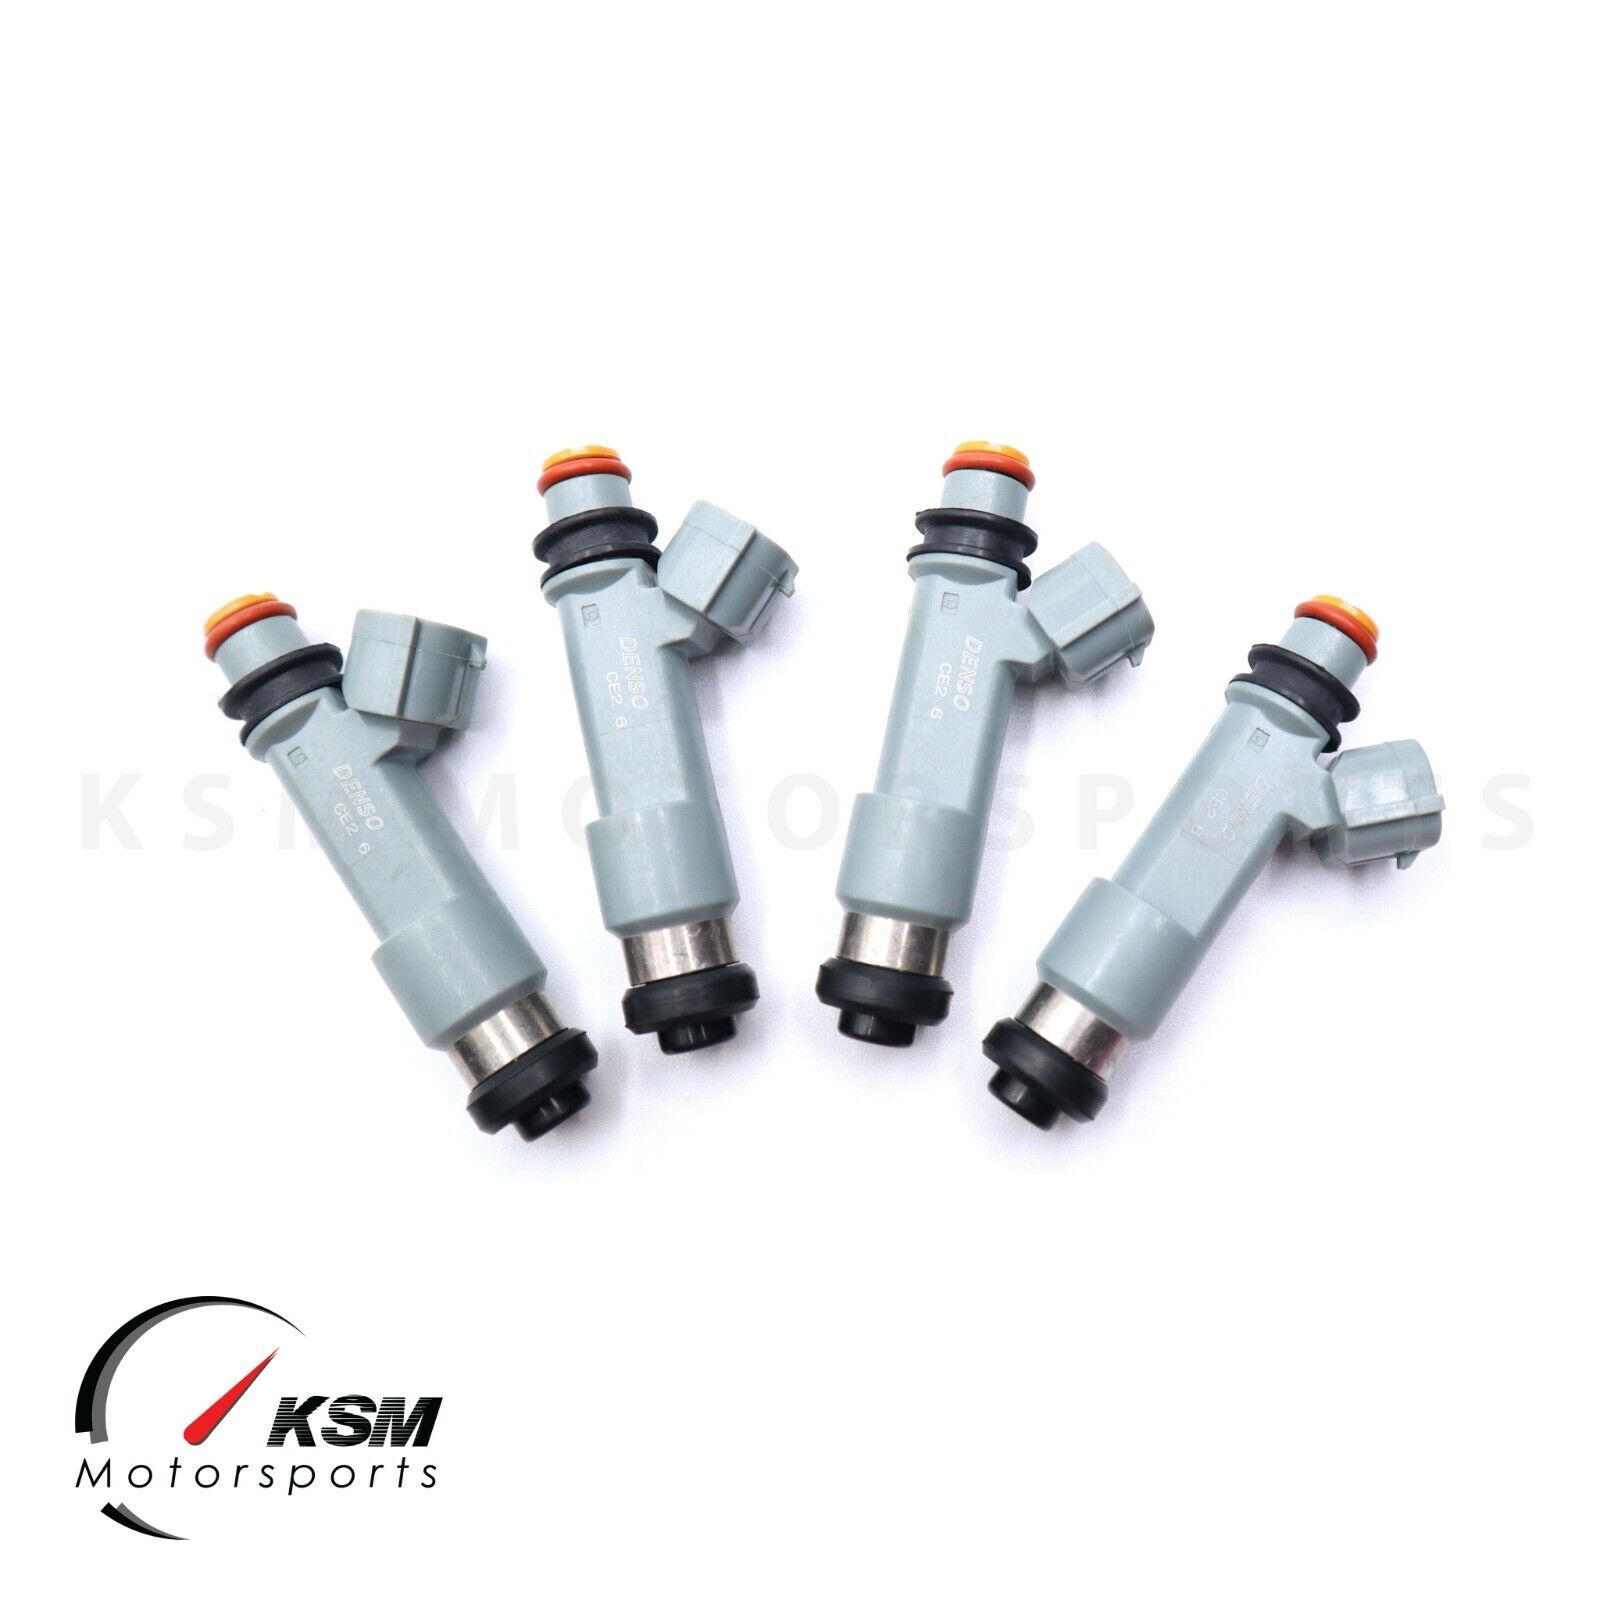 650cc Injectors For Toyota Celica MR2 Yaris Lotus Exige Elise fit Denso